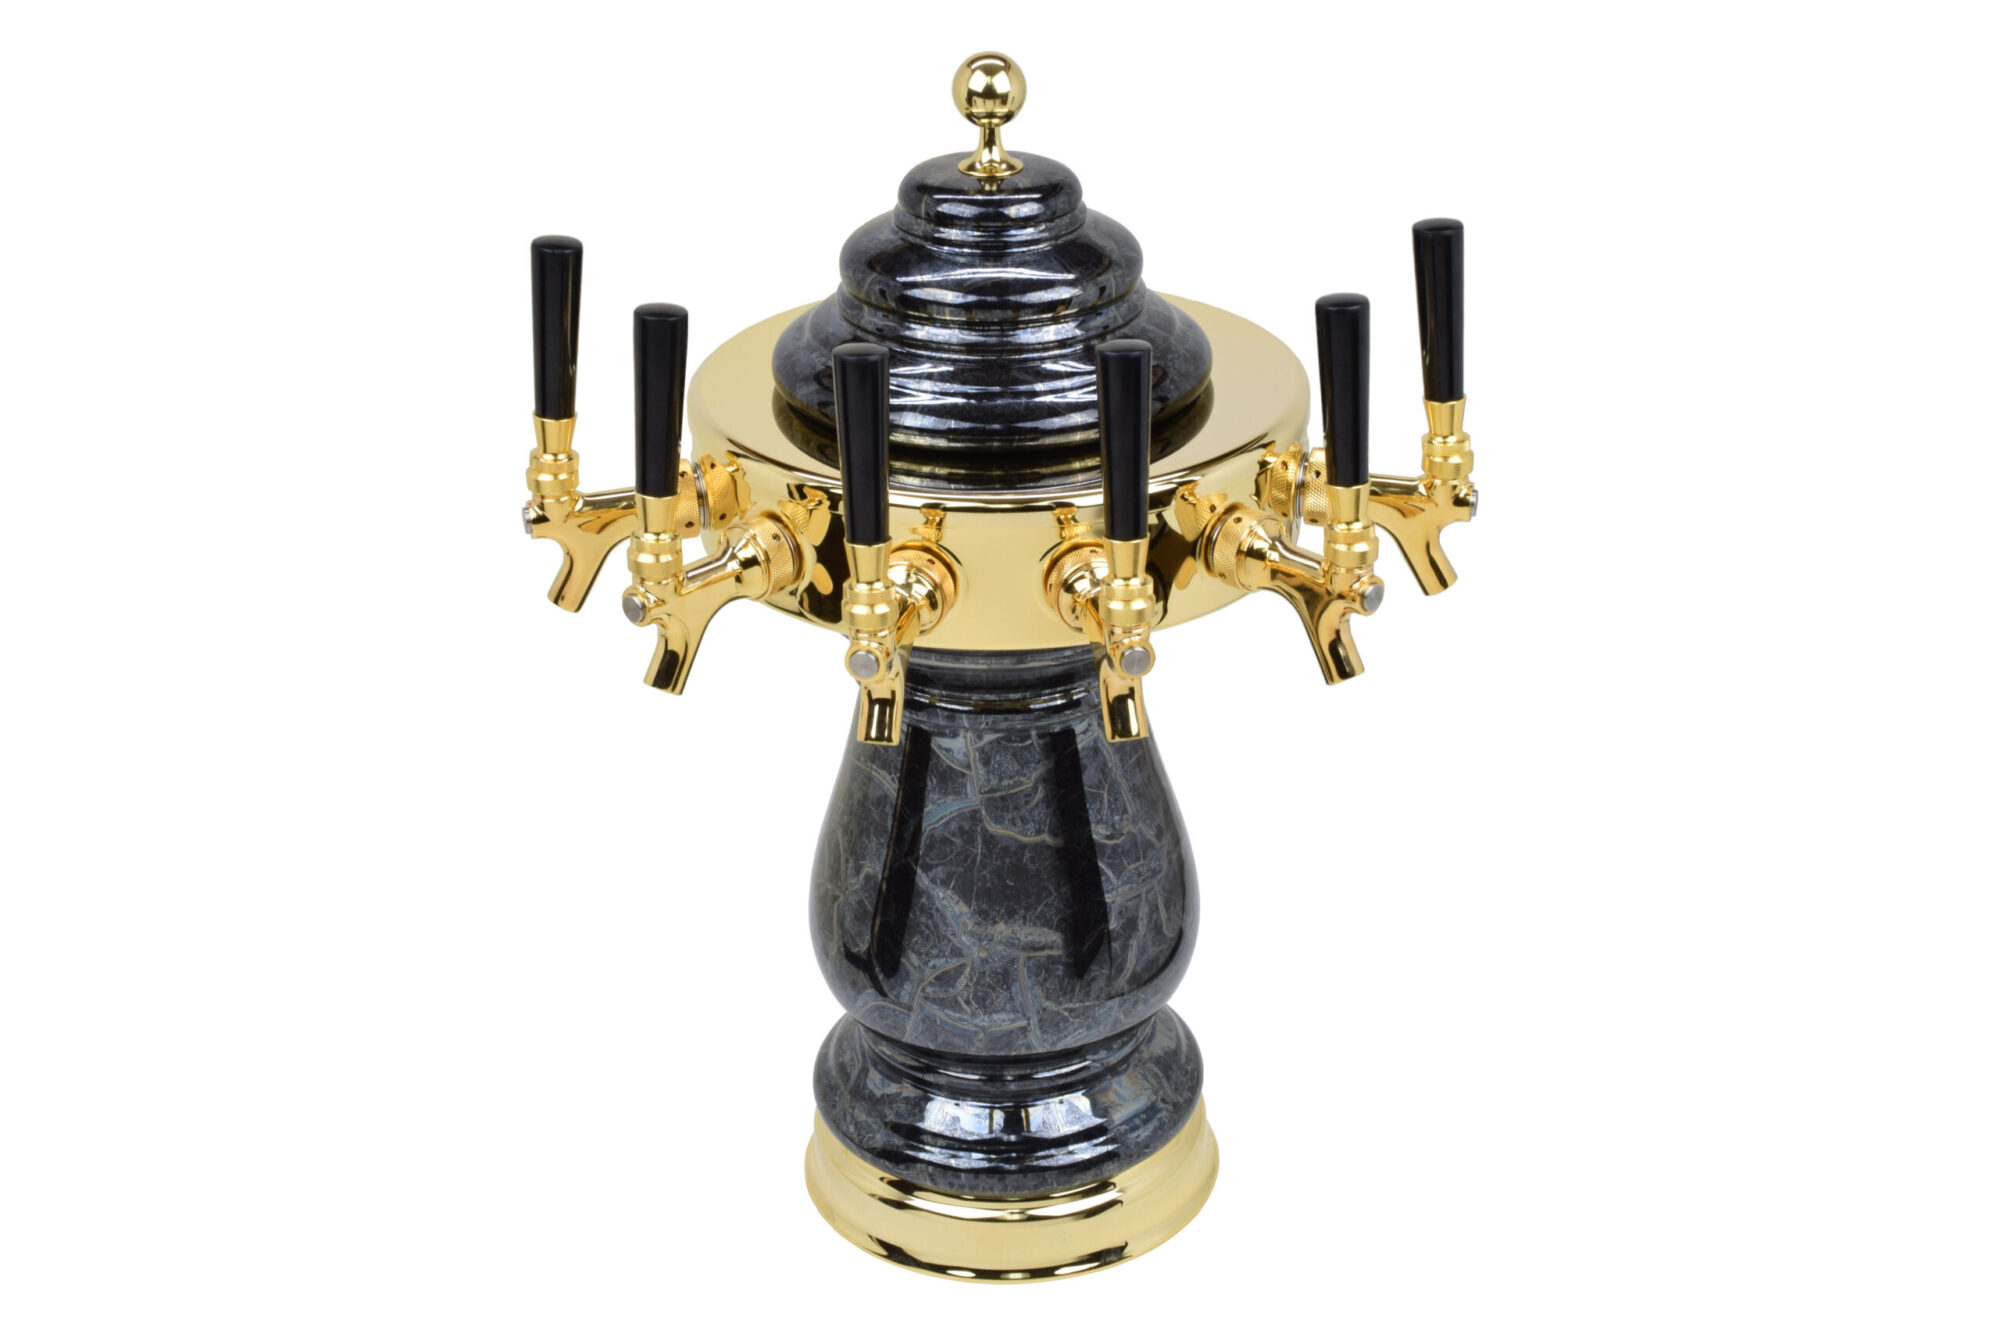 884B-6 Six Faucet Ceramic Tower with PVD Gold Hardware and Faucets - Shown in Black Marble